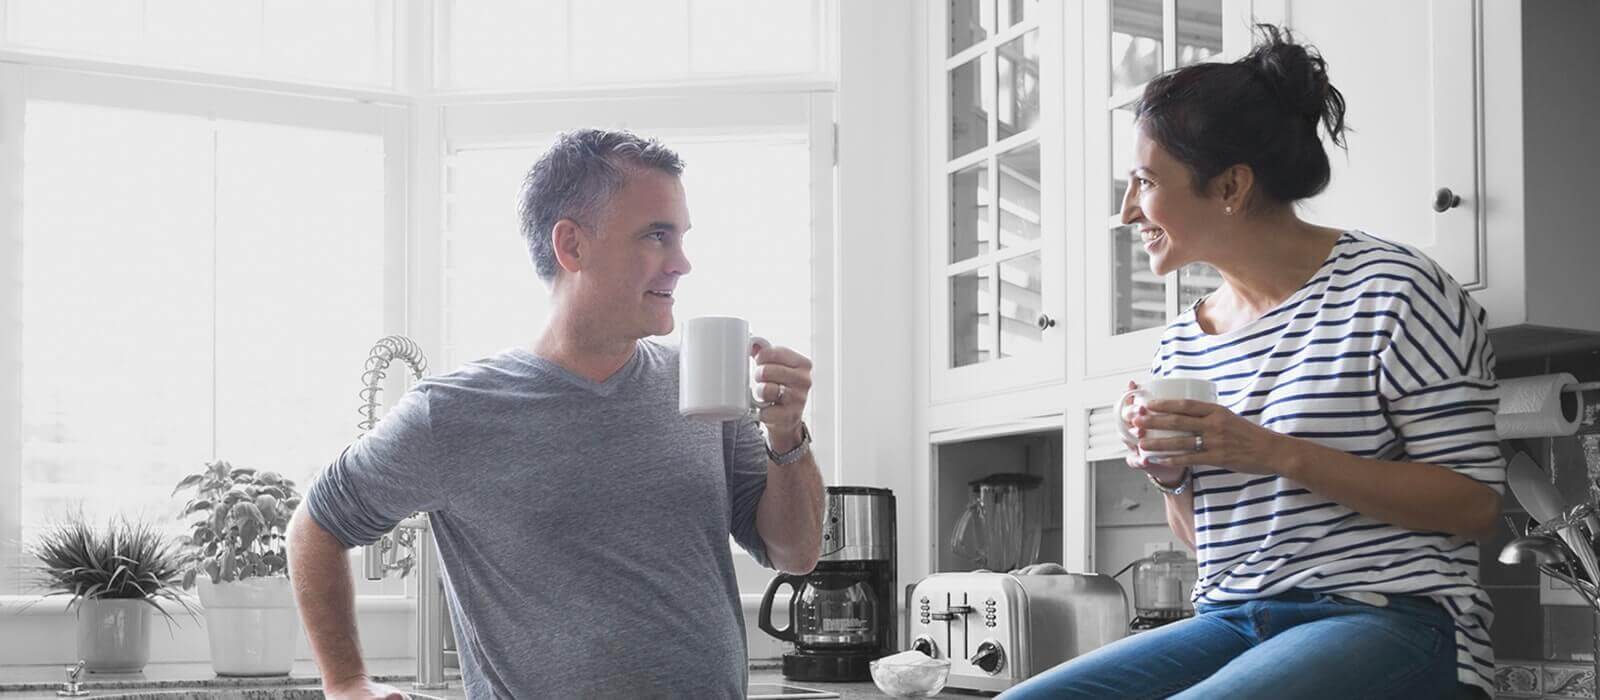 Image of a couple sitting in kitchen drinking coffee together.